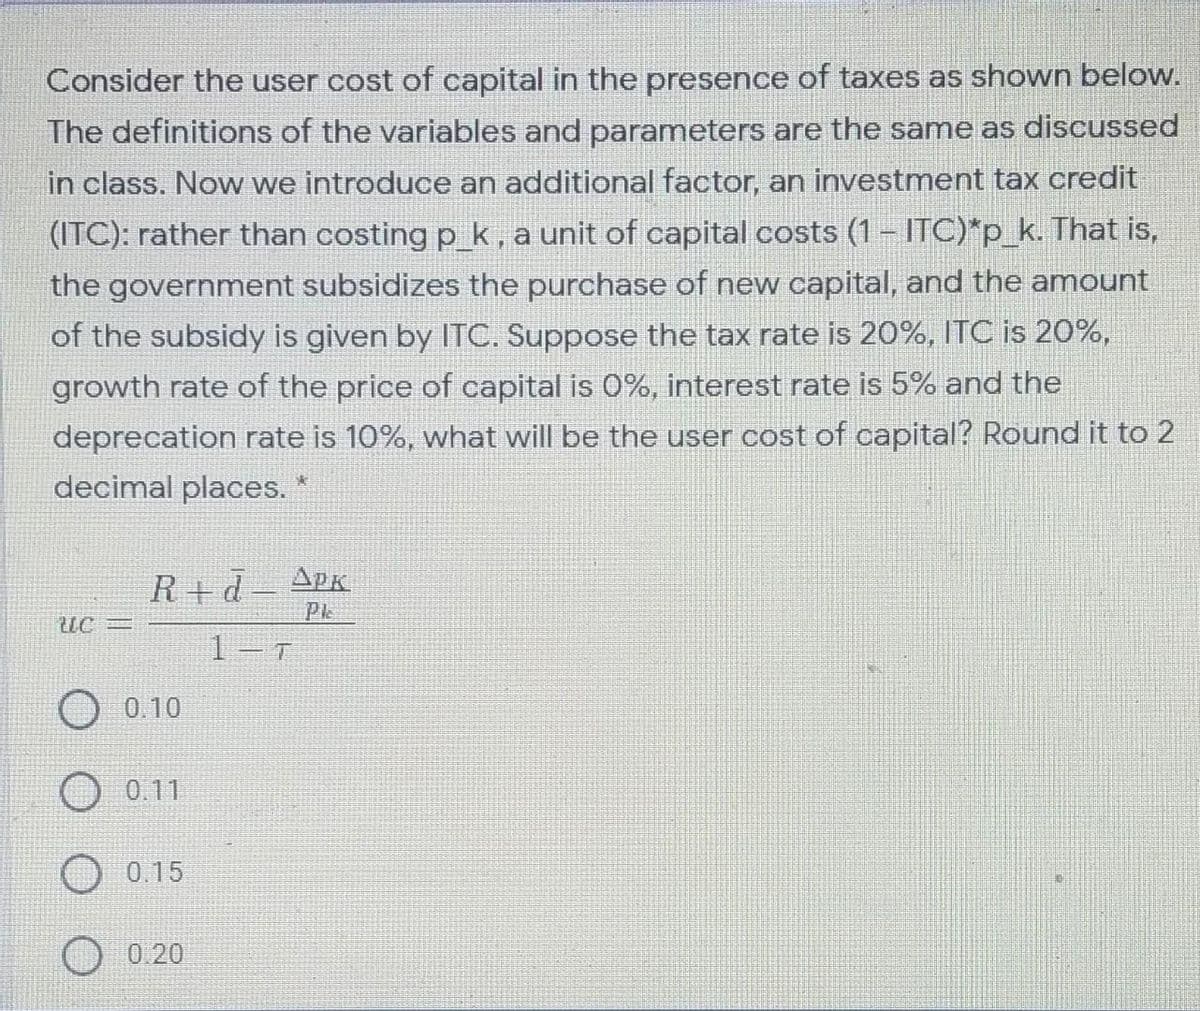 Consider the user cost of capital in the presence of taxes as shown below.
The definitions of the variables and parameters are the same as discussed
in class. Now we introduce an additional factor, an investment tax credit
(ITC): rather than costing p k, a unit of capital costs (1- lTC)*p_k. That is,
the government subsidizes the purchase of new capital, and the amount
of the subsidy is given by ITC. Suppose the tax rate is 20%, ITC is 20%,
growth rate of the price of capital is 0%, interest rate is 5% and the
deprecation rate is 10%, what will be the user cost of capital? Round it to 2
decimal places. *
R+d
APK
Pk
UC3=
1-T
0.10
0.11
0.15
0.20
